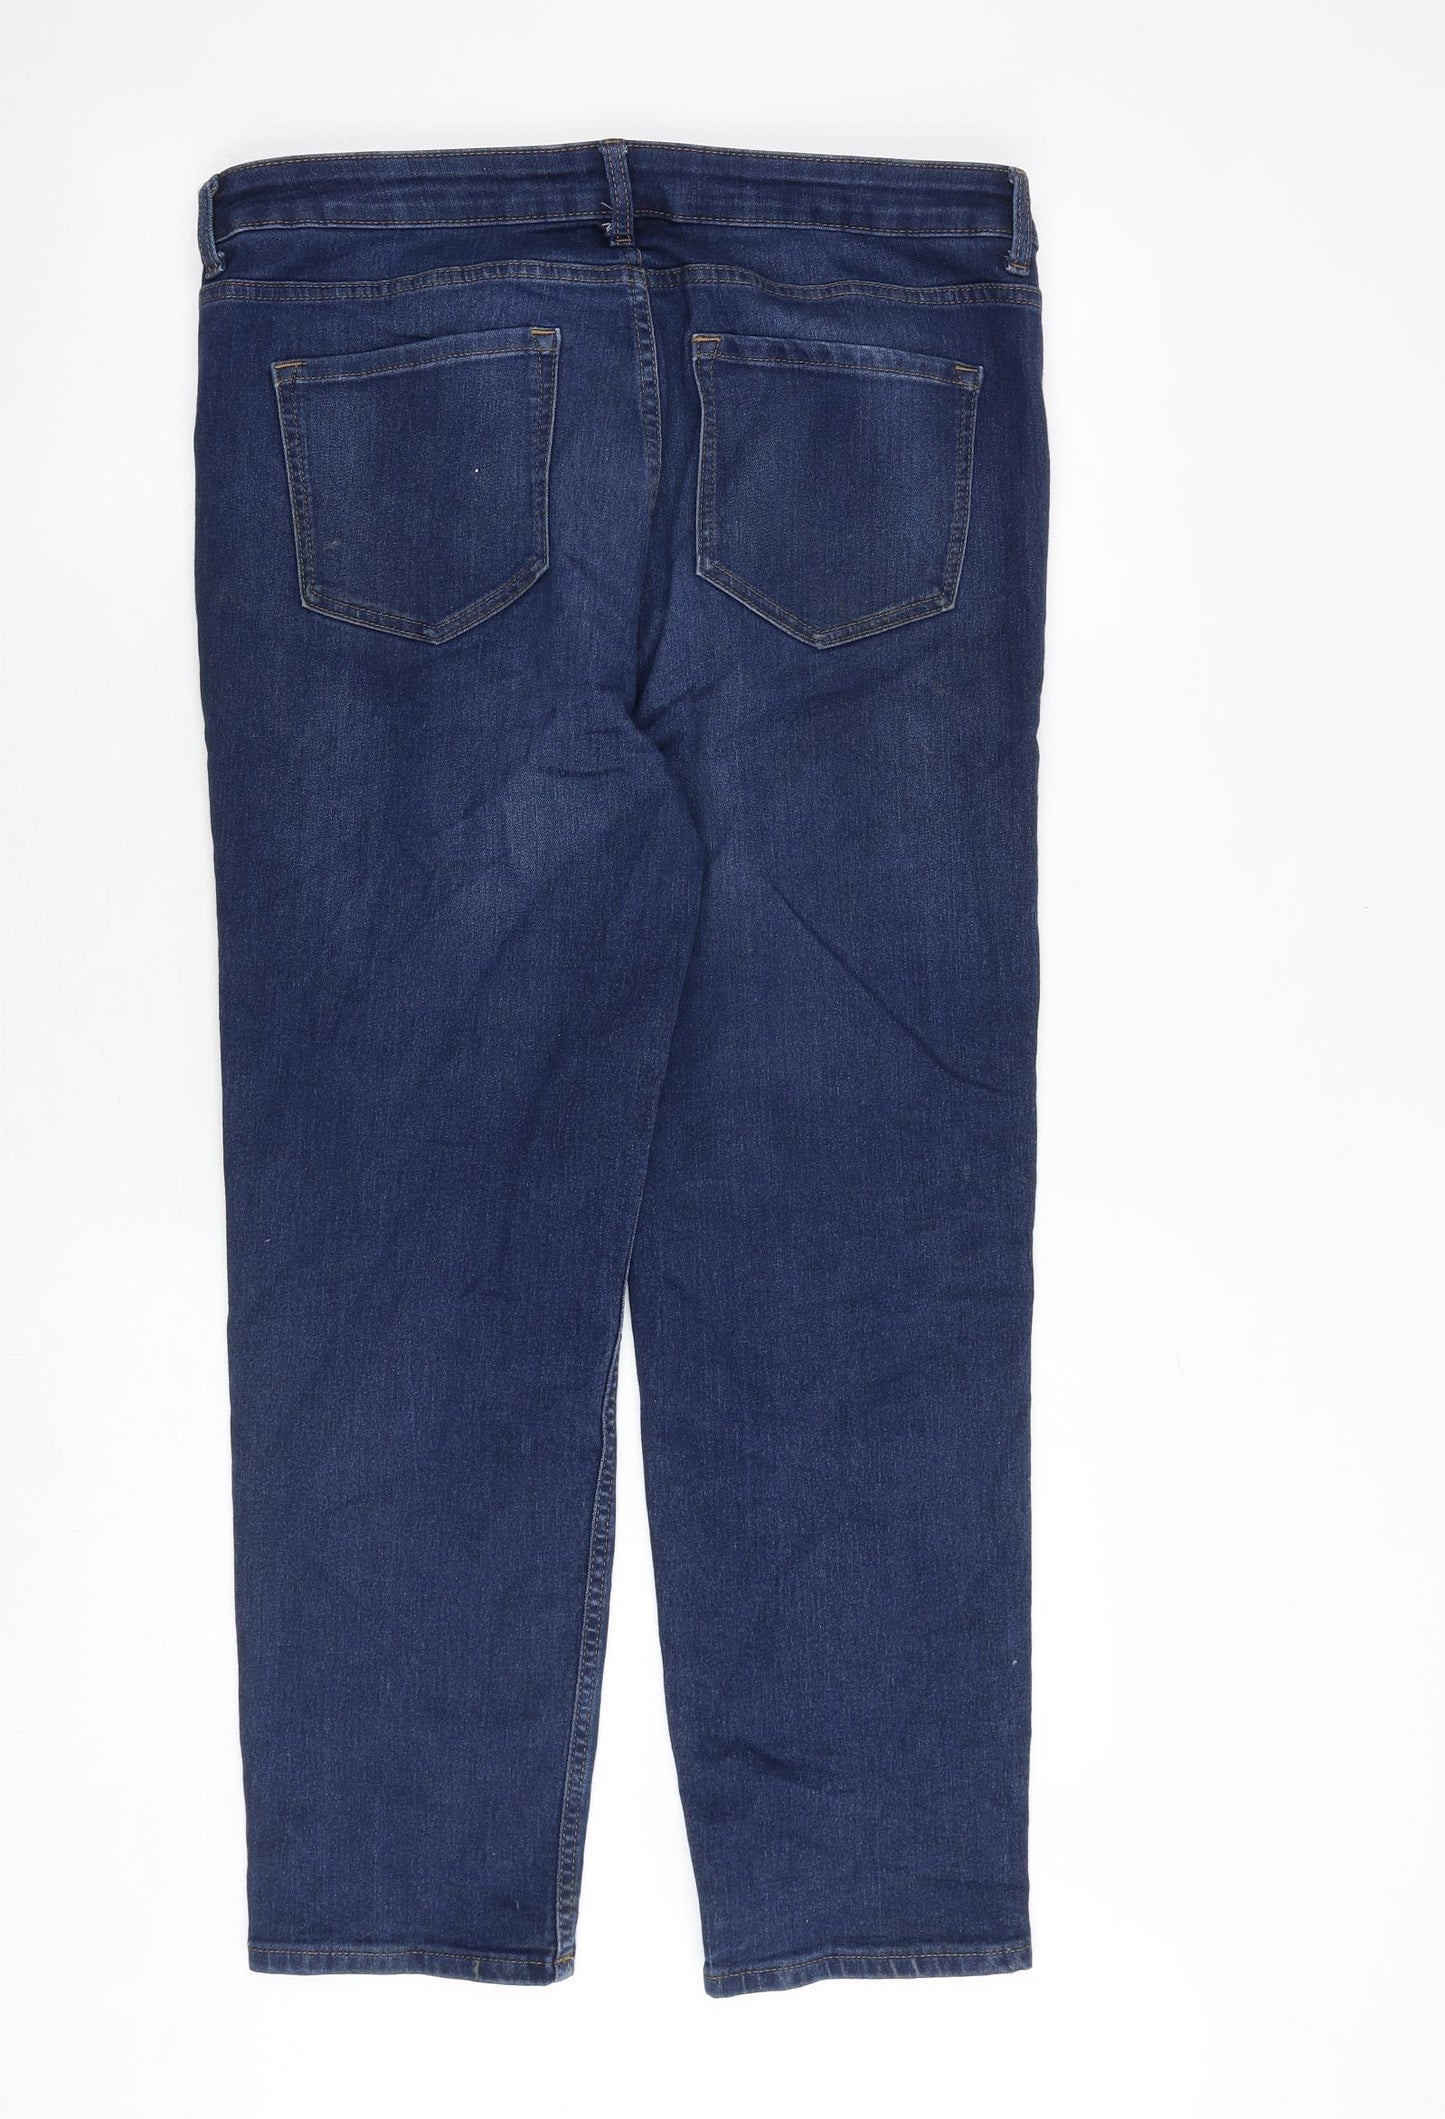 Marks and Spencer Womens Blue Cotton Straight Jeans Size 16 Regular Zip